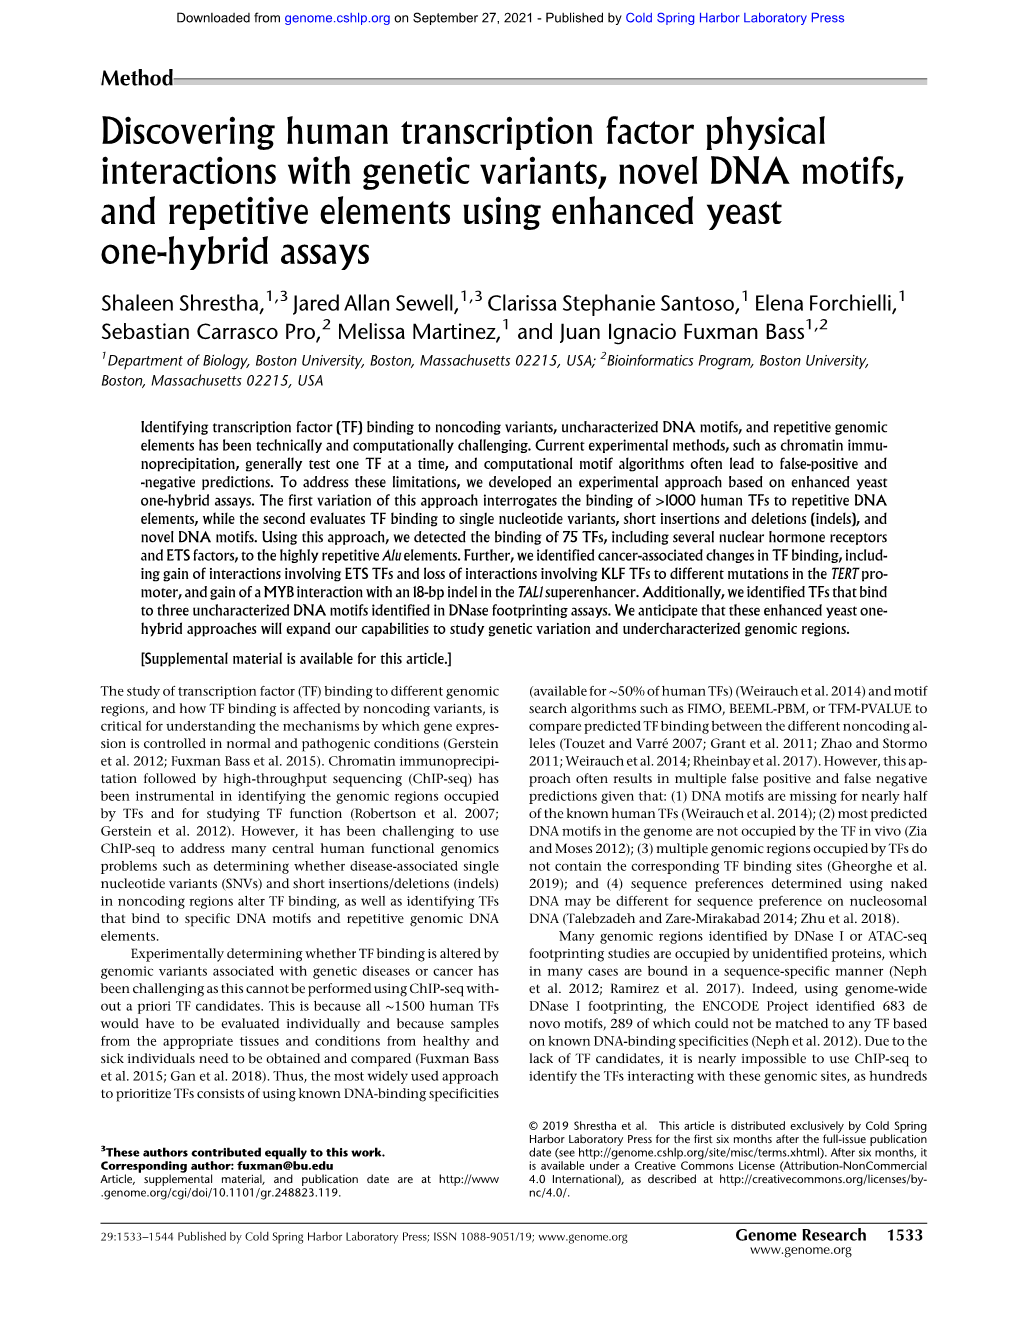 Discovering Human Transcription Factor Physical Interactions with Genetic Variants, Novel DNA Motifs, and Repetitive Elements Using Enhanced Yeast One-Hybrid Assays